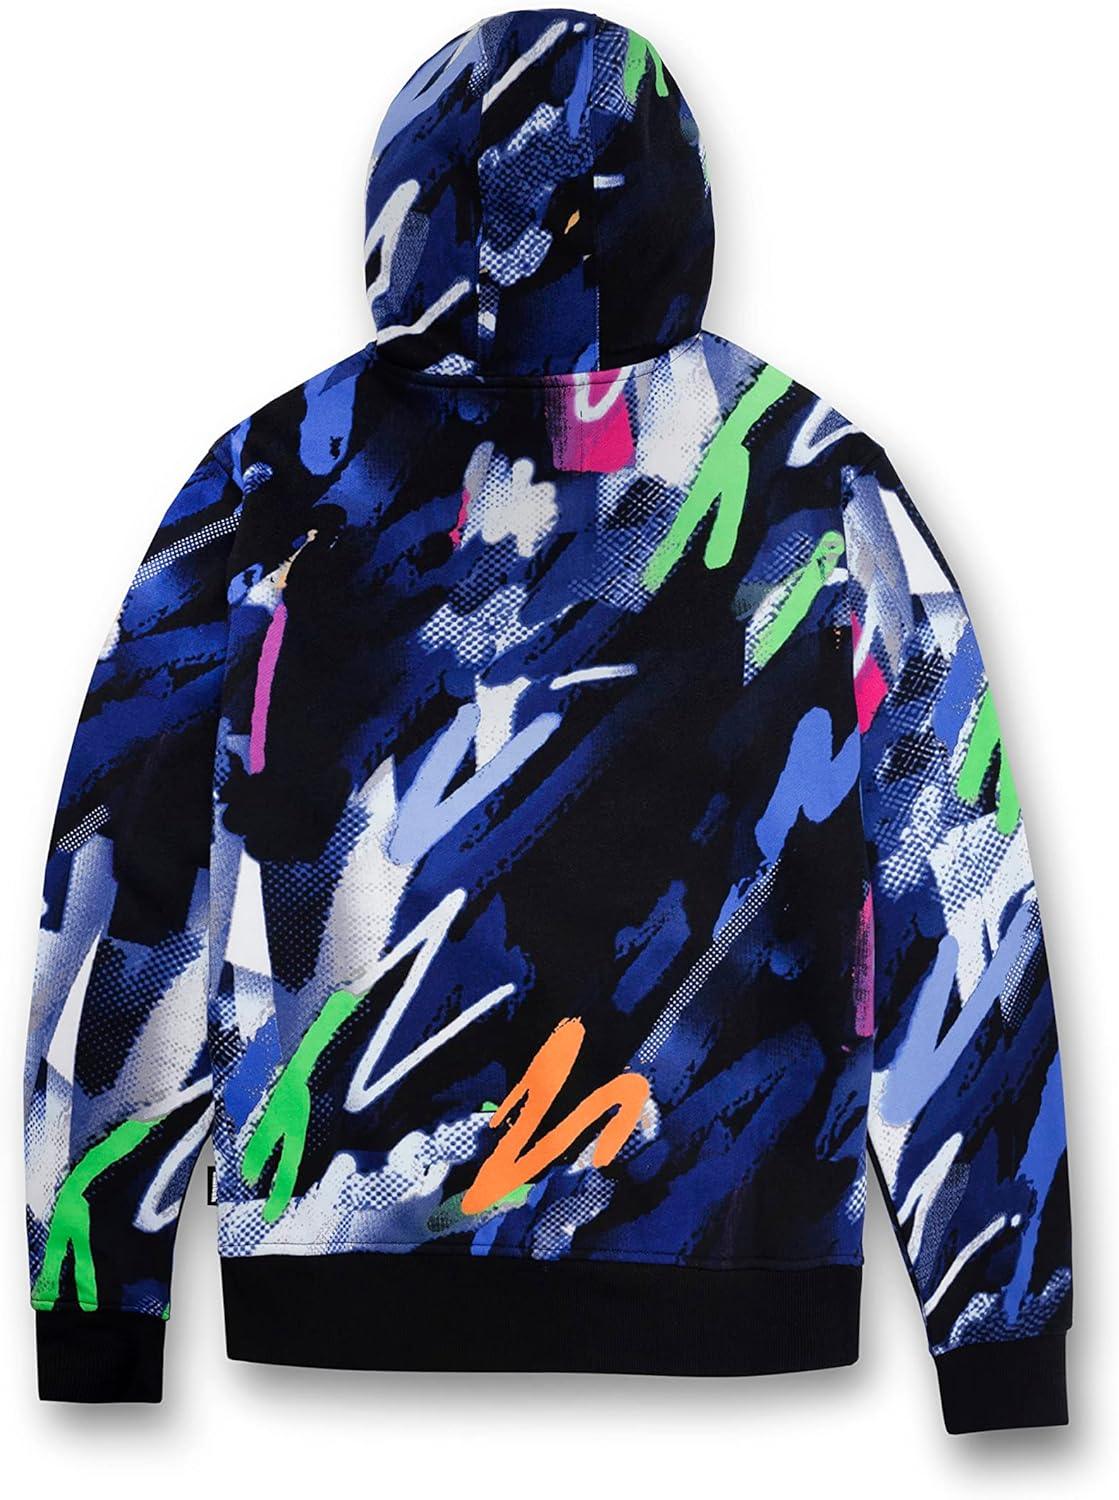 Twitch Multicolor Hoodie Sweatshirt hooded with Print - Massive Discounts